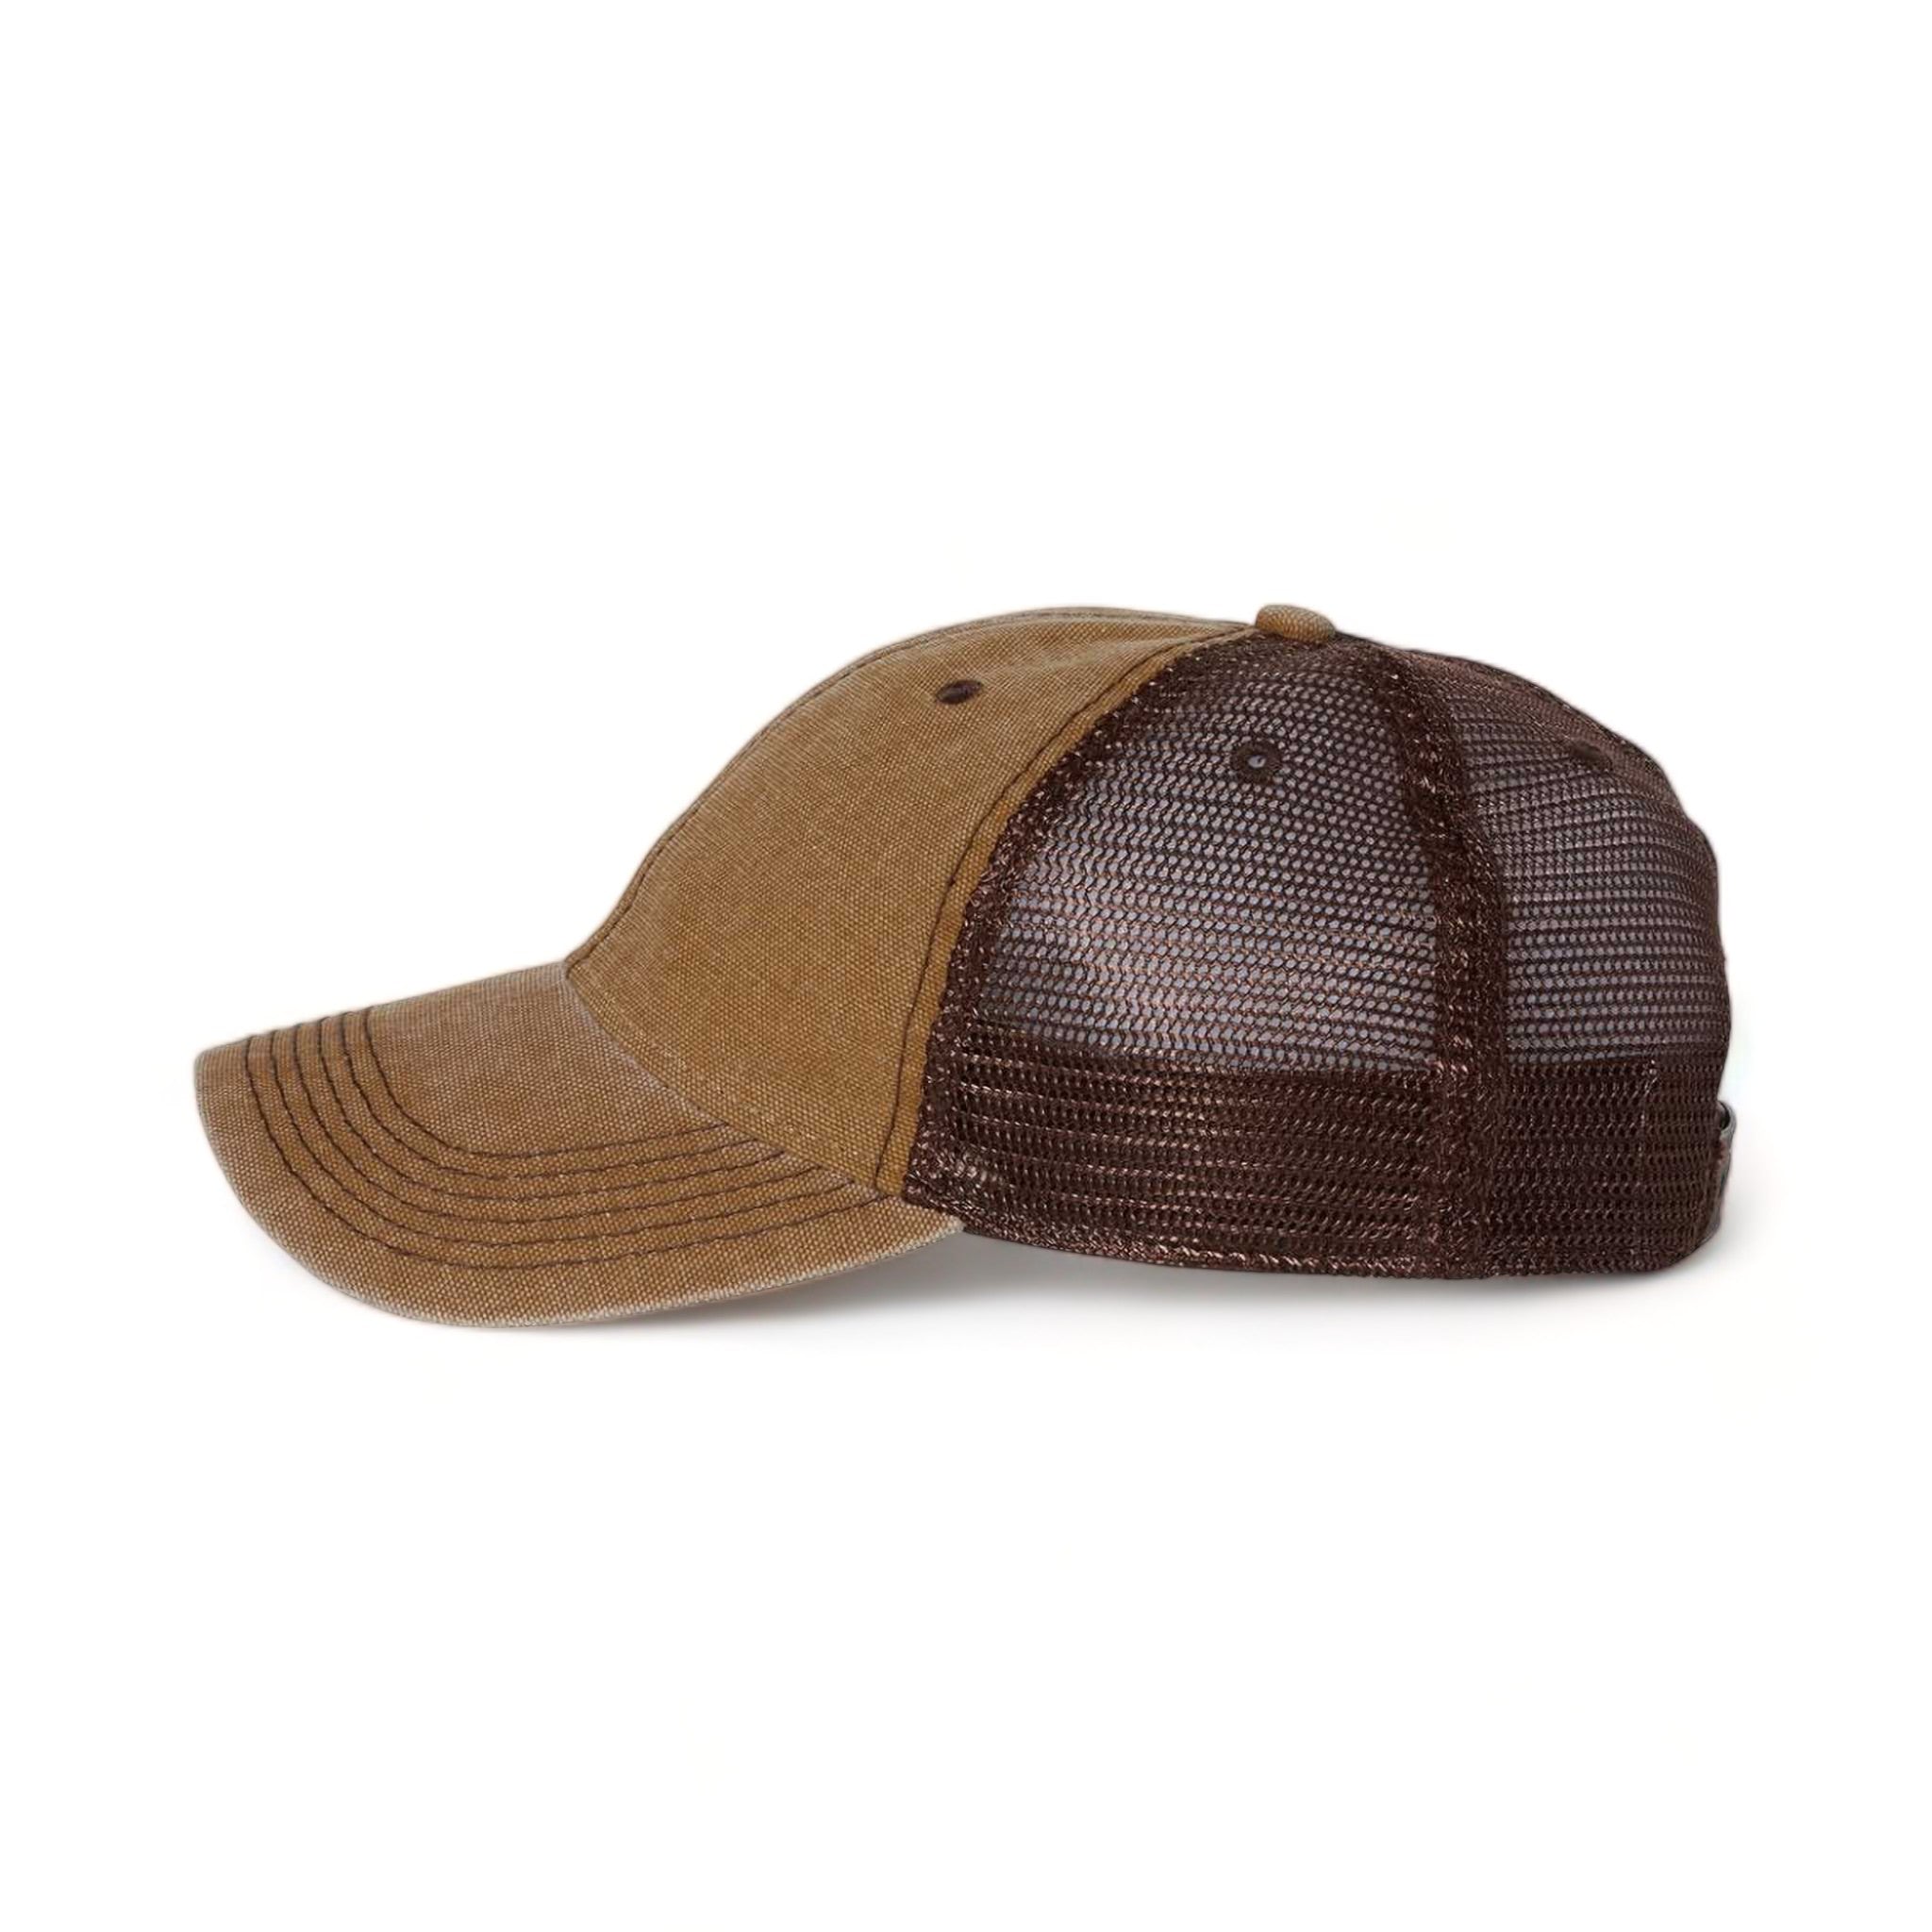 Side view of LEGACY DTA custom hat in camel and brown